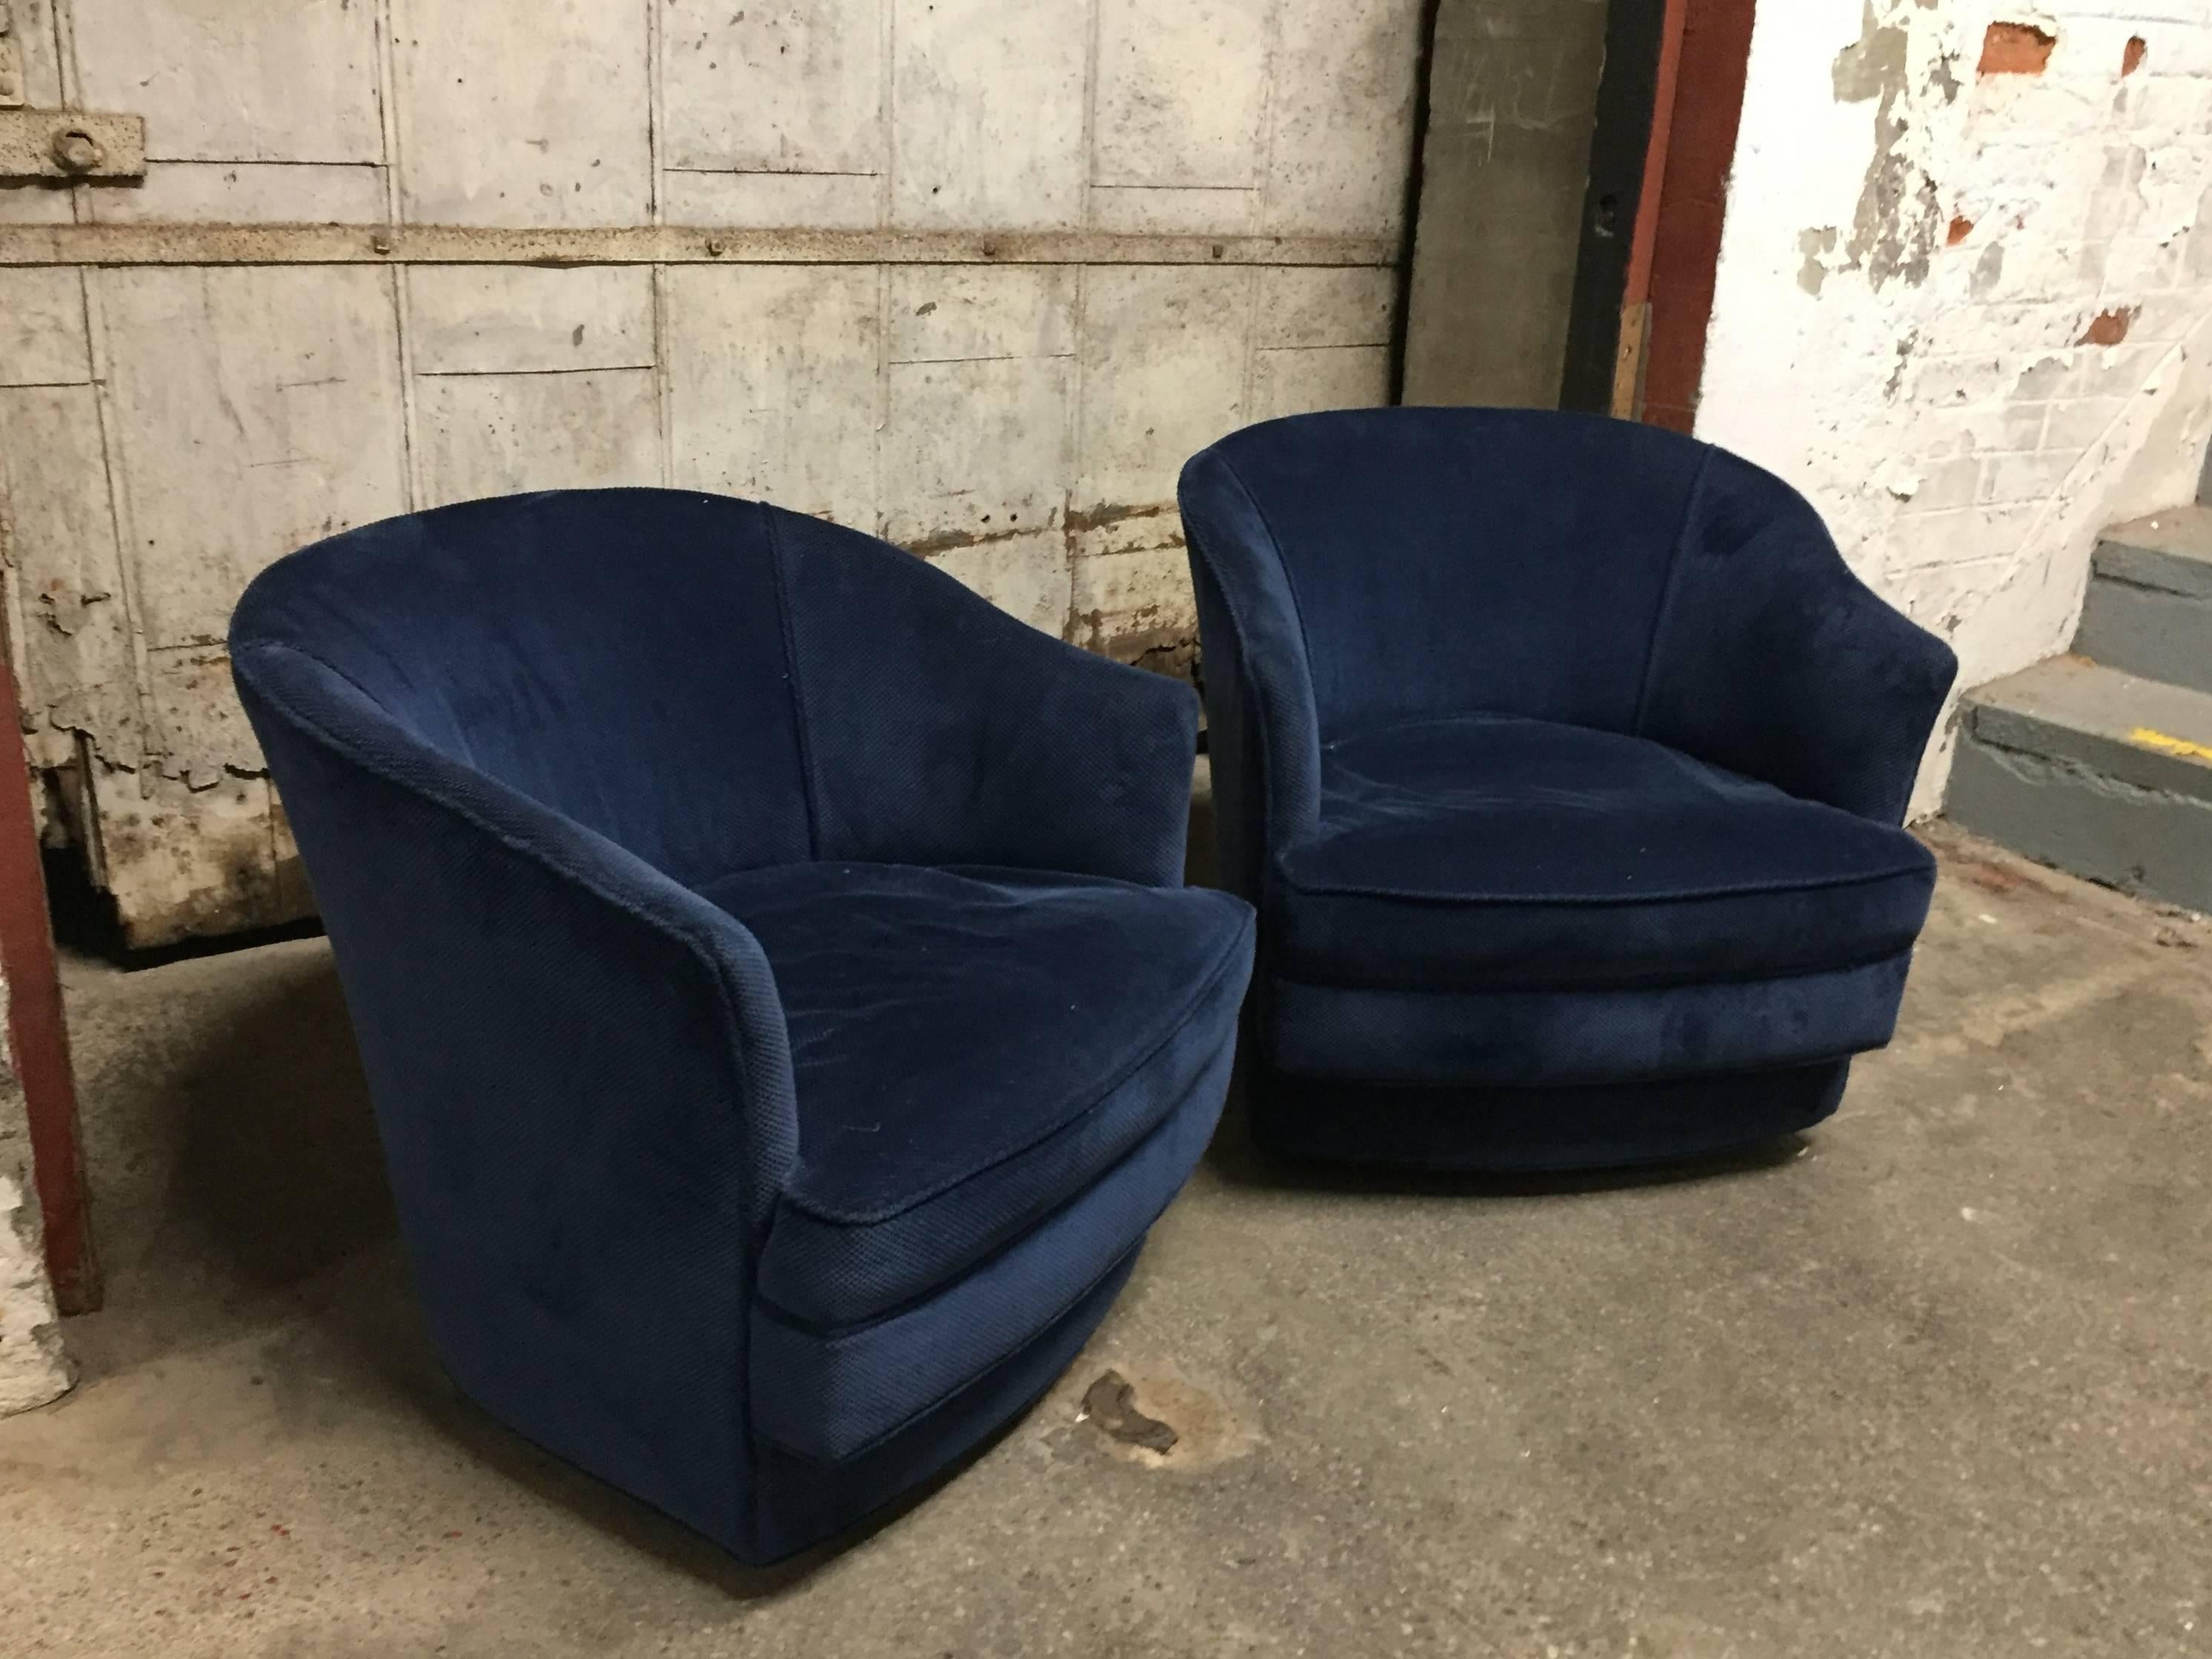 Pair of fabric upholstered swivel chairs that retailed from John Stuart, circa 1967. Labeled on the underside and dated. Comfort and small-scale. They both come with two throw pillows.